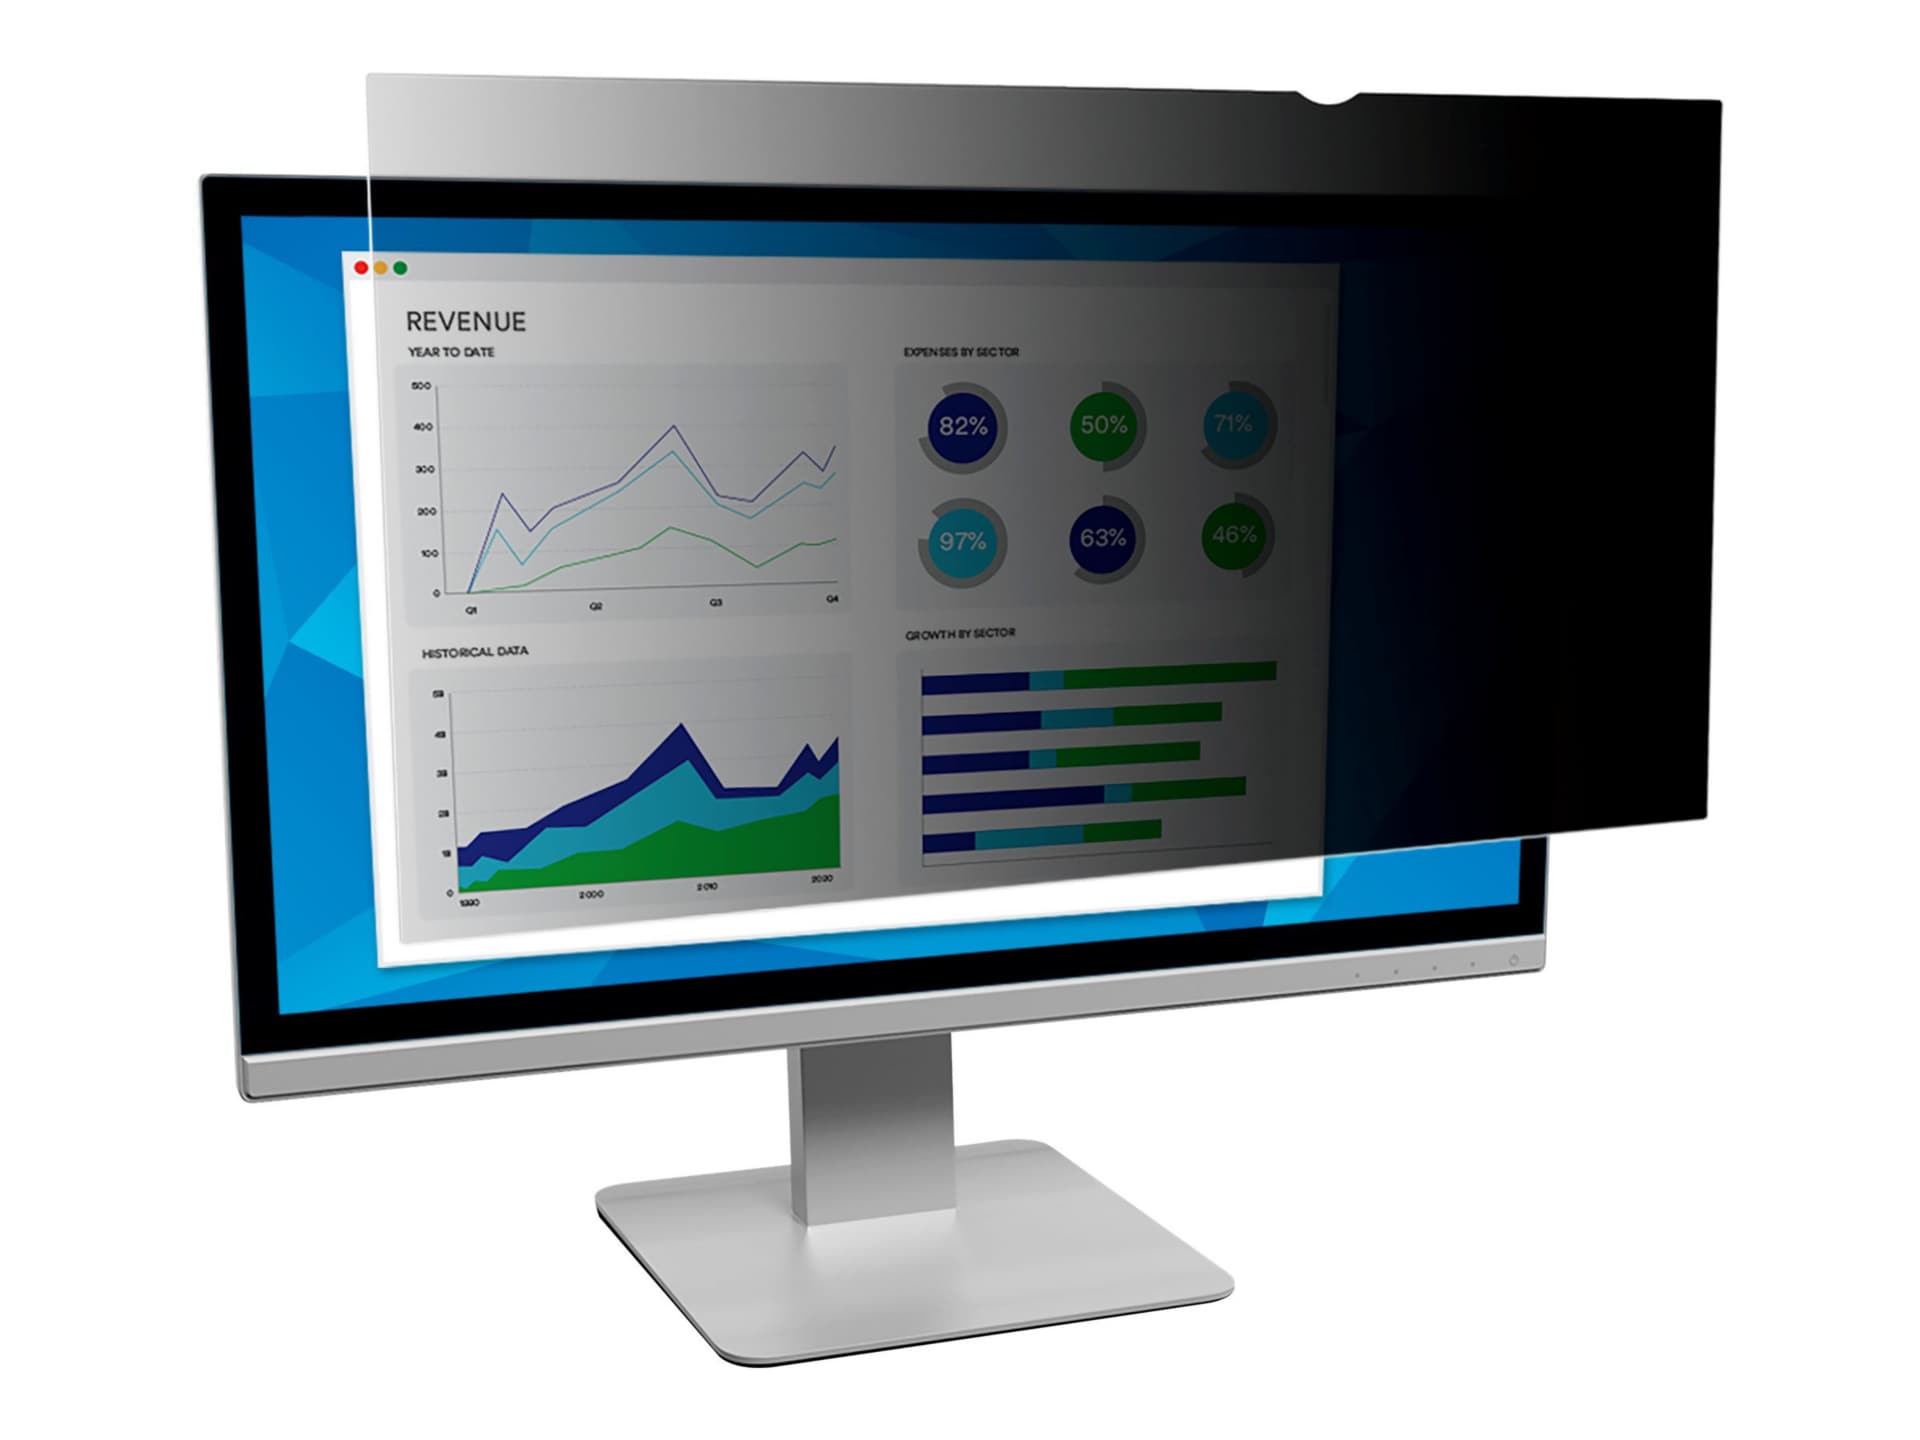 3M Privacy Filter for 18.5" Monitors 16:9 - display privacy filter - 18.5" wide